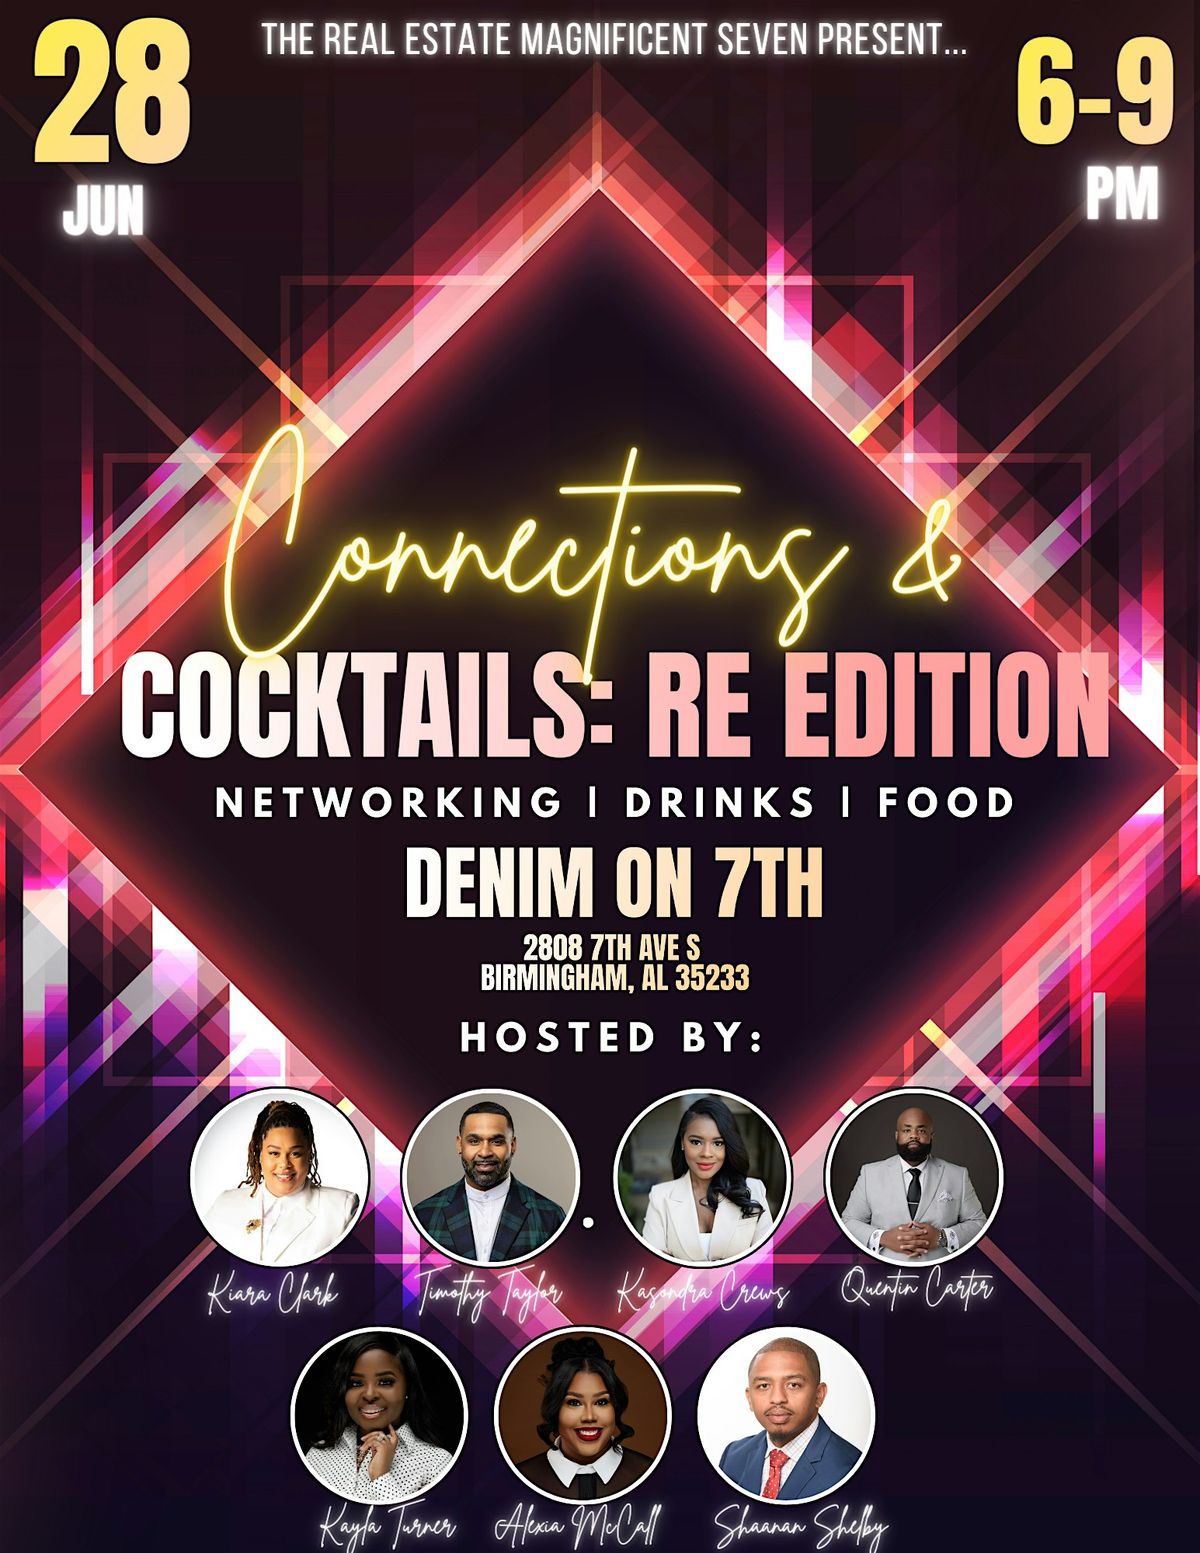 Connections and Cocktails: RE Edition